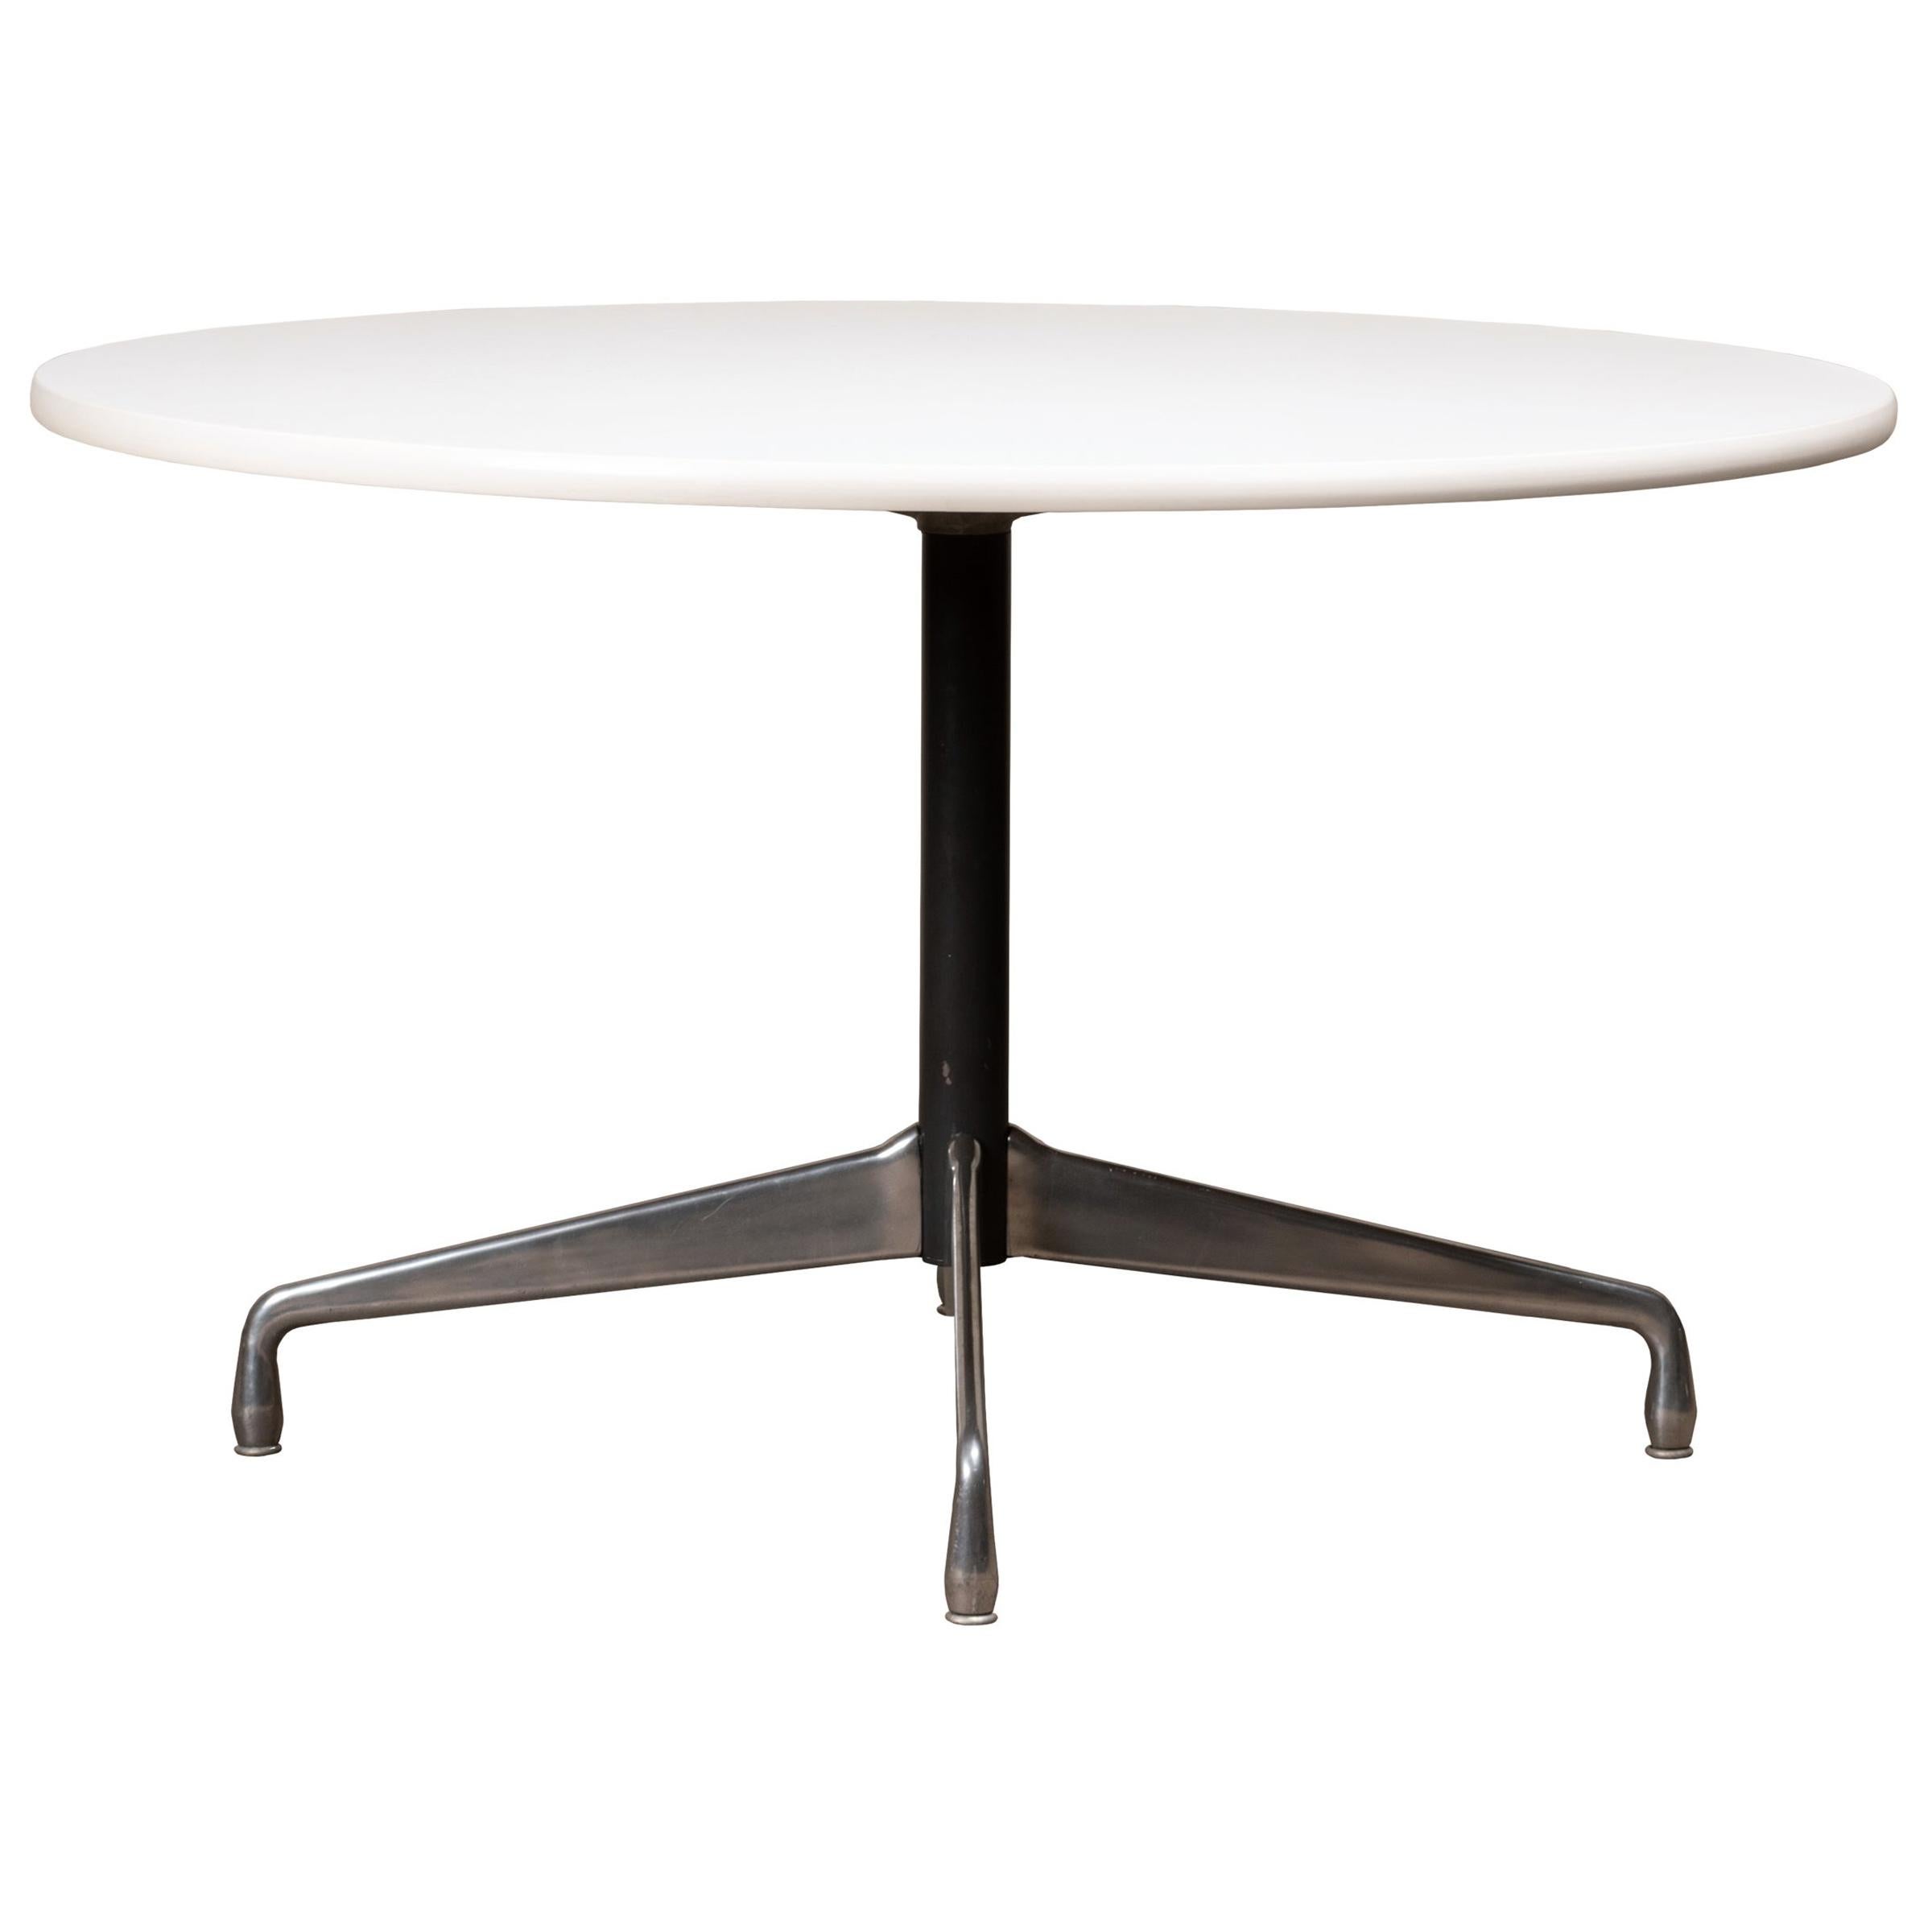 Charles & Ray Eames Segmented round and white Dining Table for Herman Miller